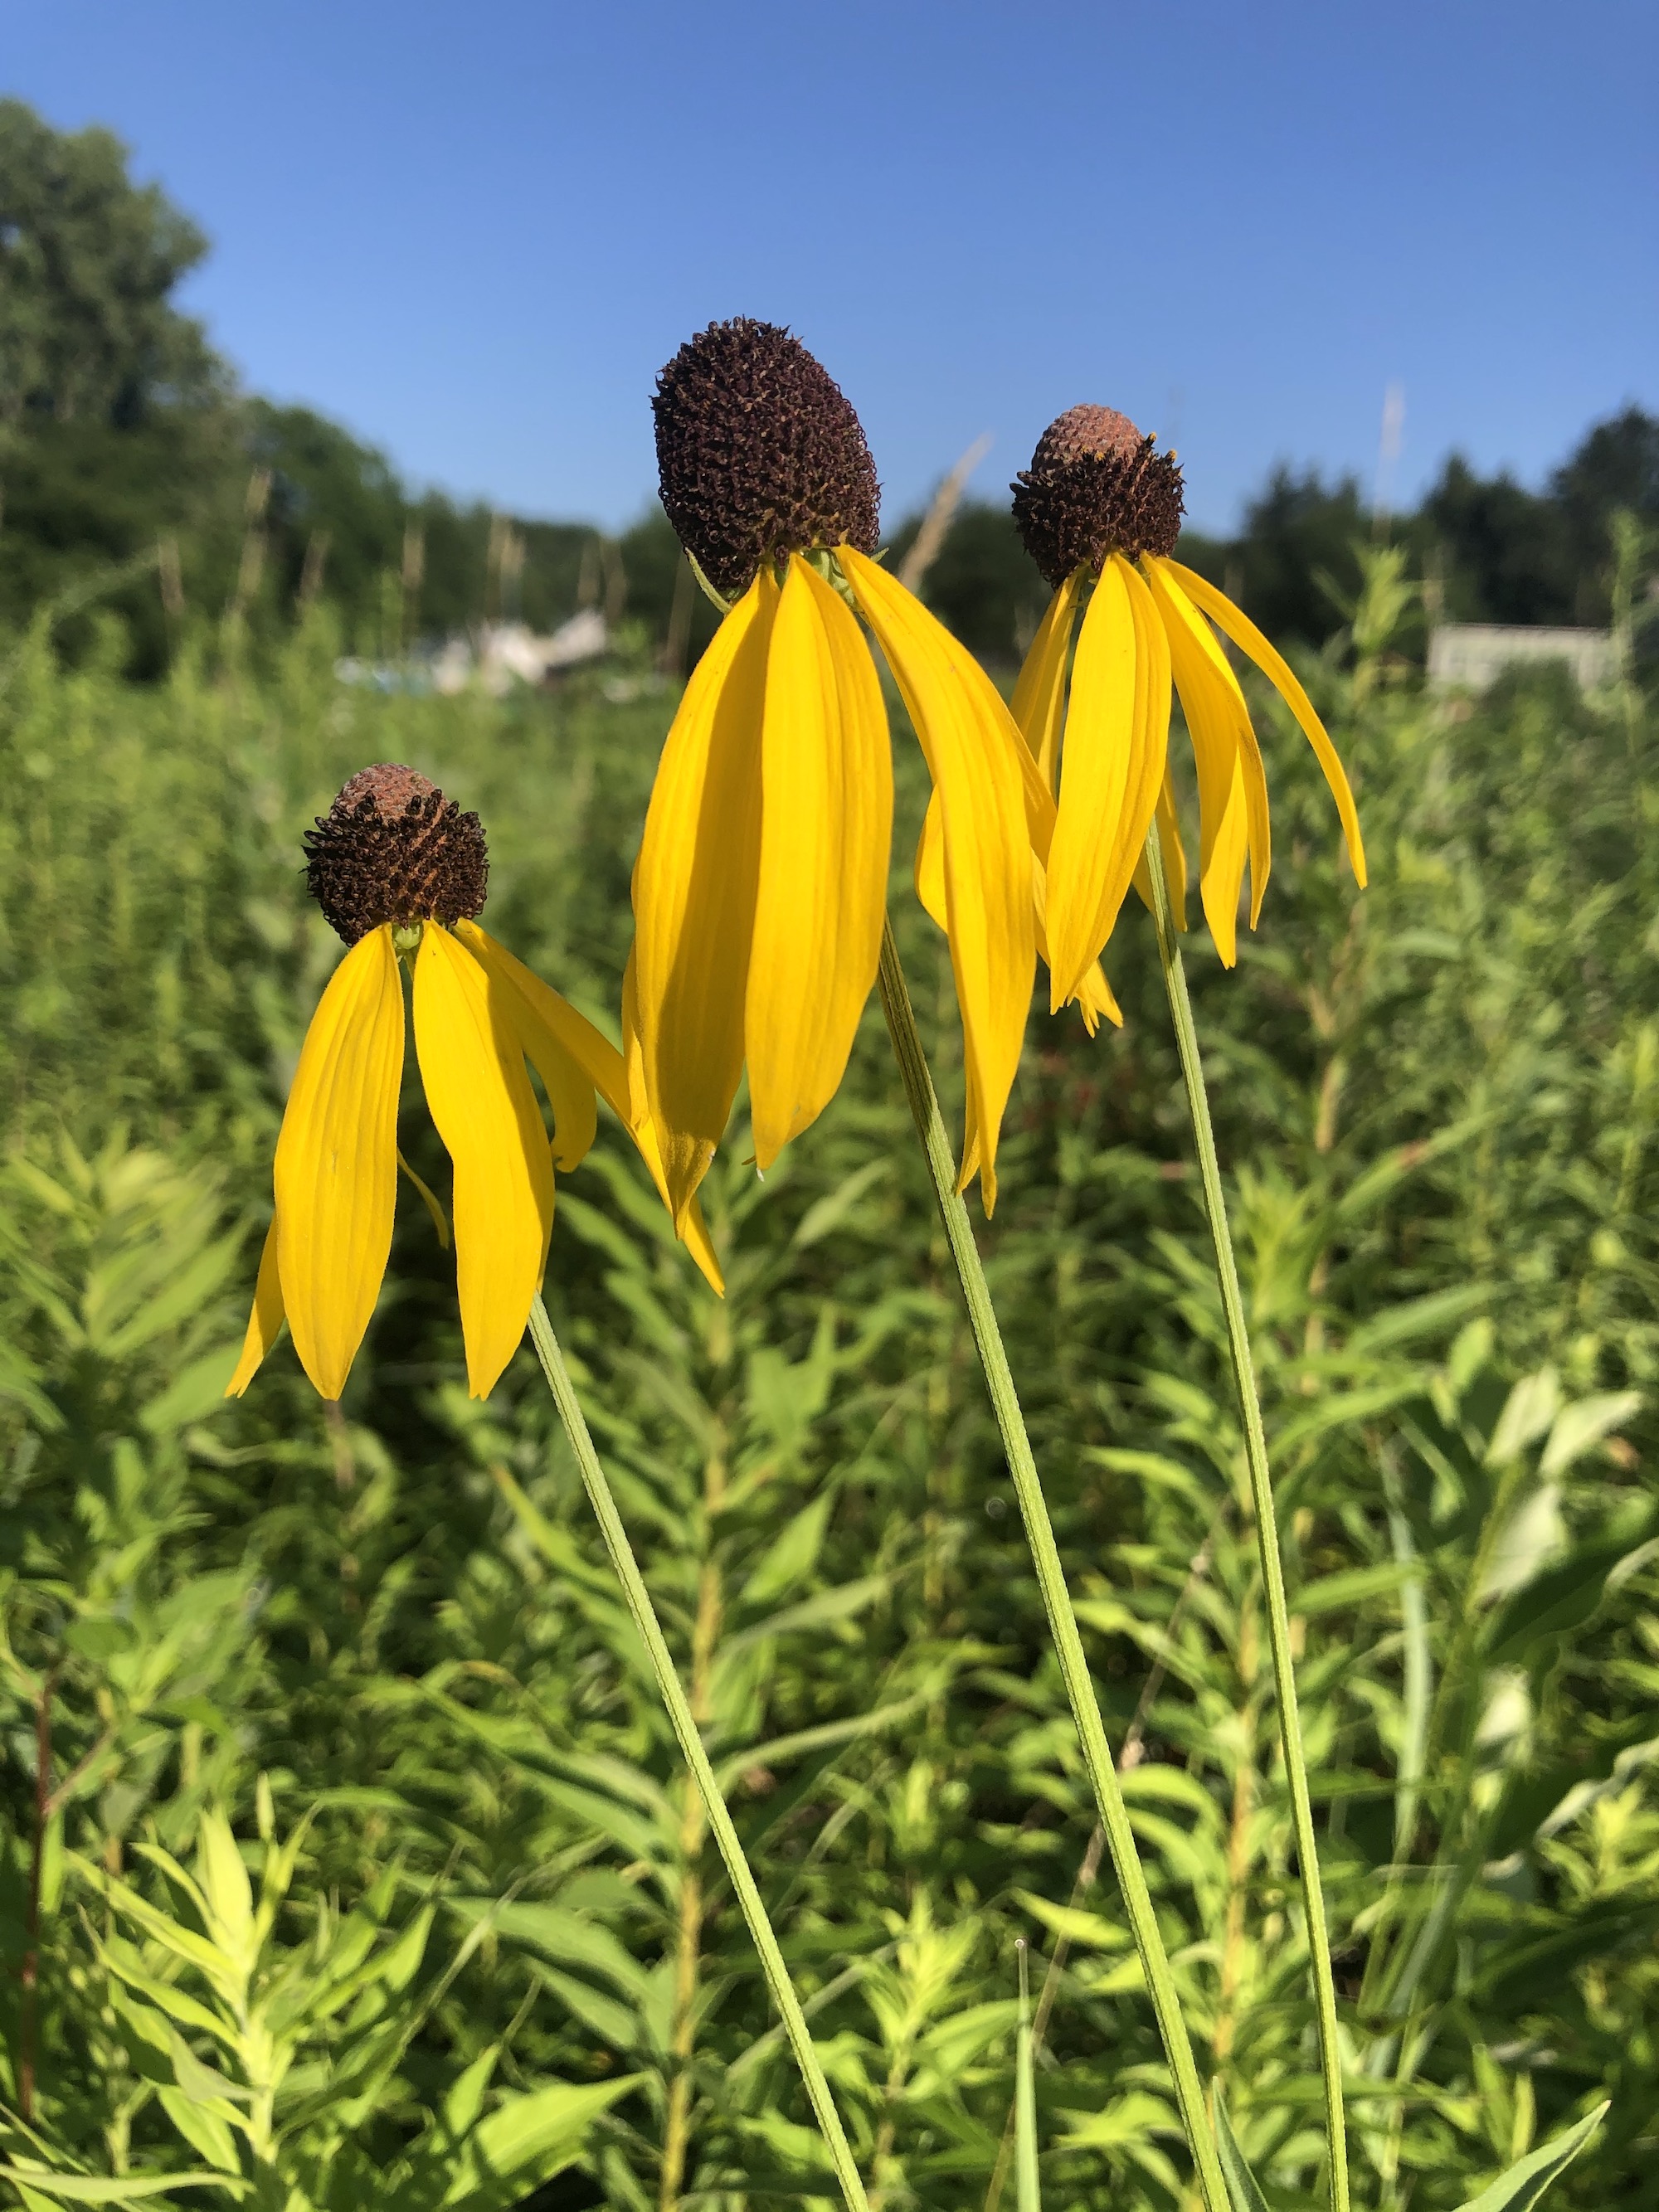 Gray-headed coneflower on shore of Marion Dunn Pond  in Madison, Wisconsin on July 17, 2020.